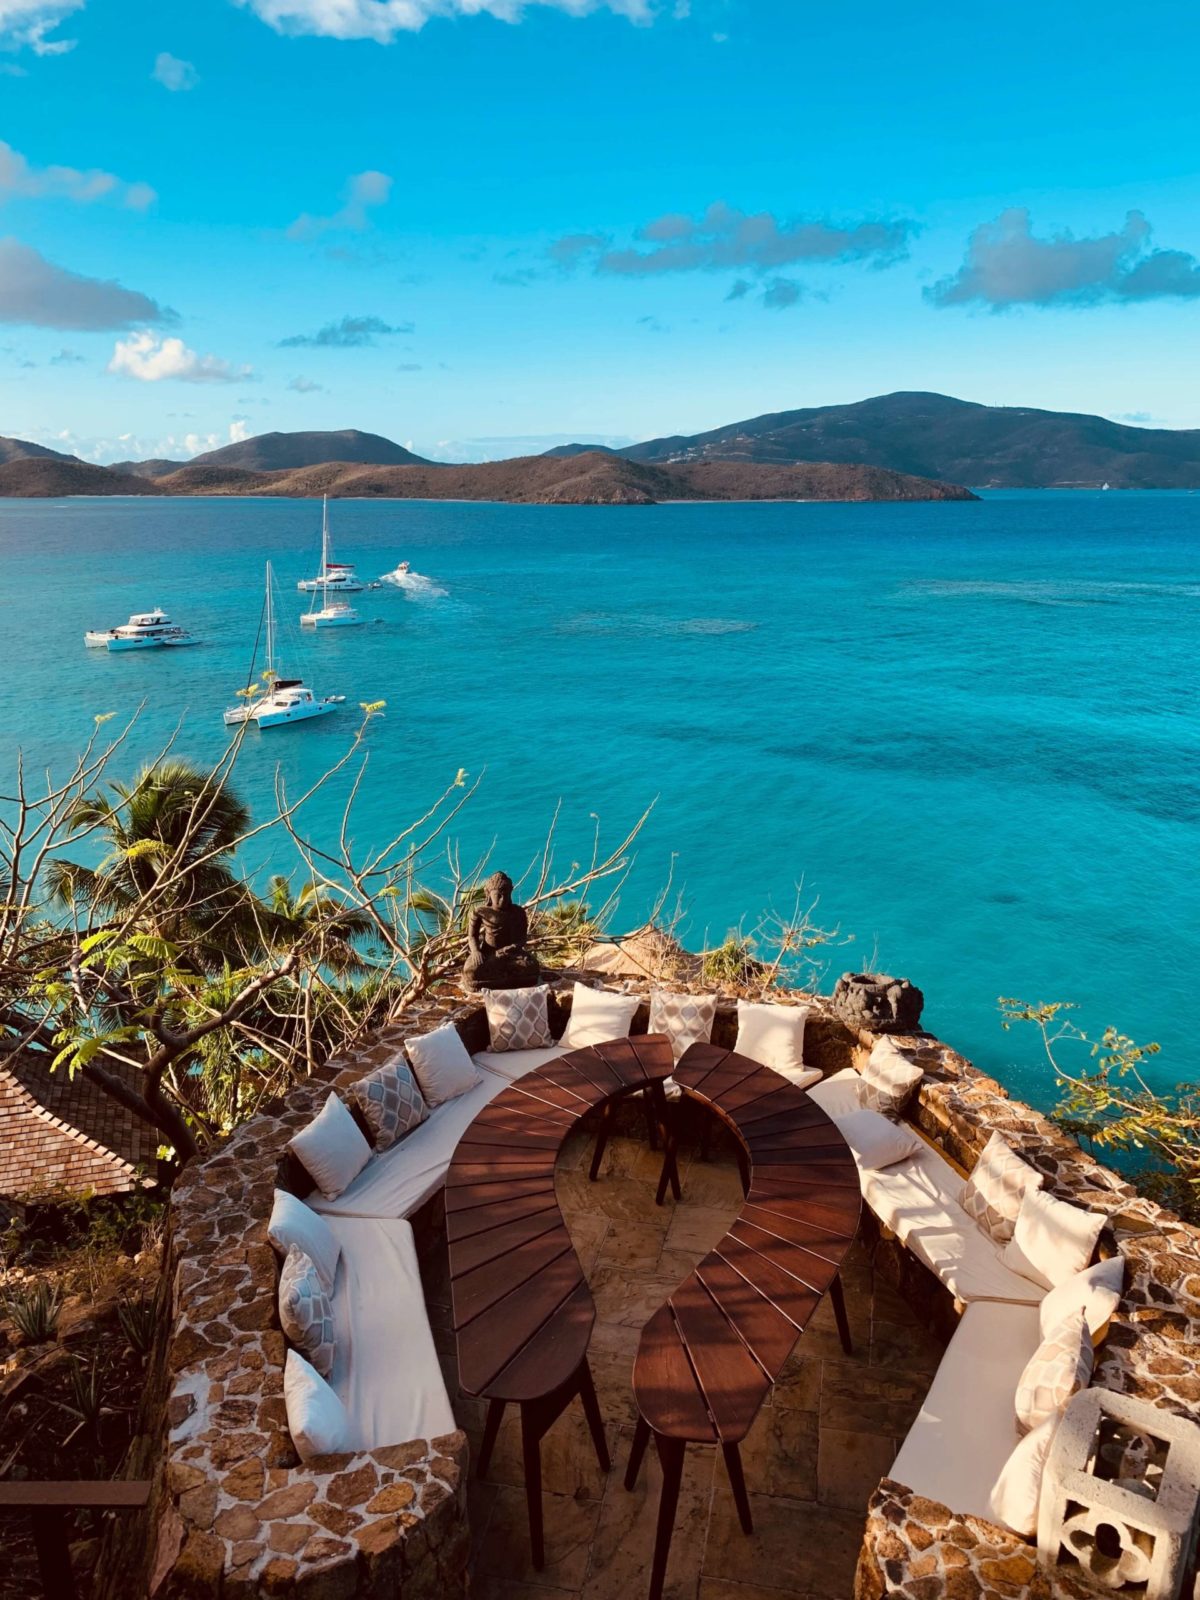 2020 vacation - A view of boats on the ocean from an outdoor dining area in the British Virgin Islands